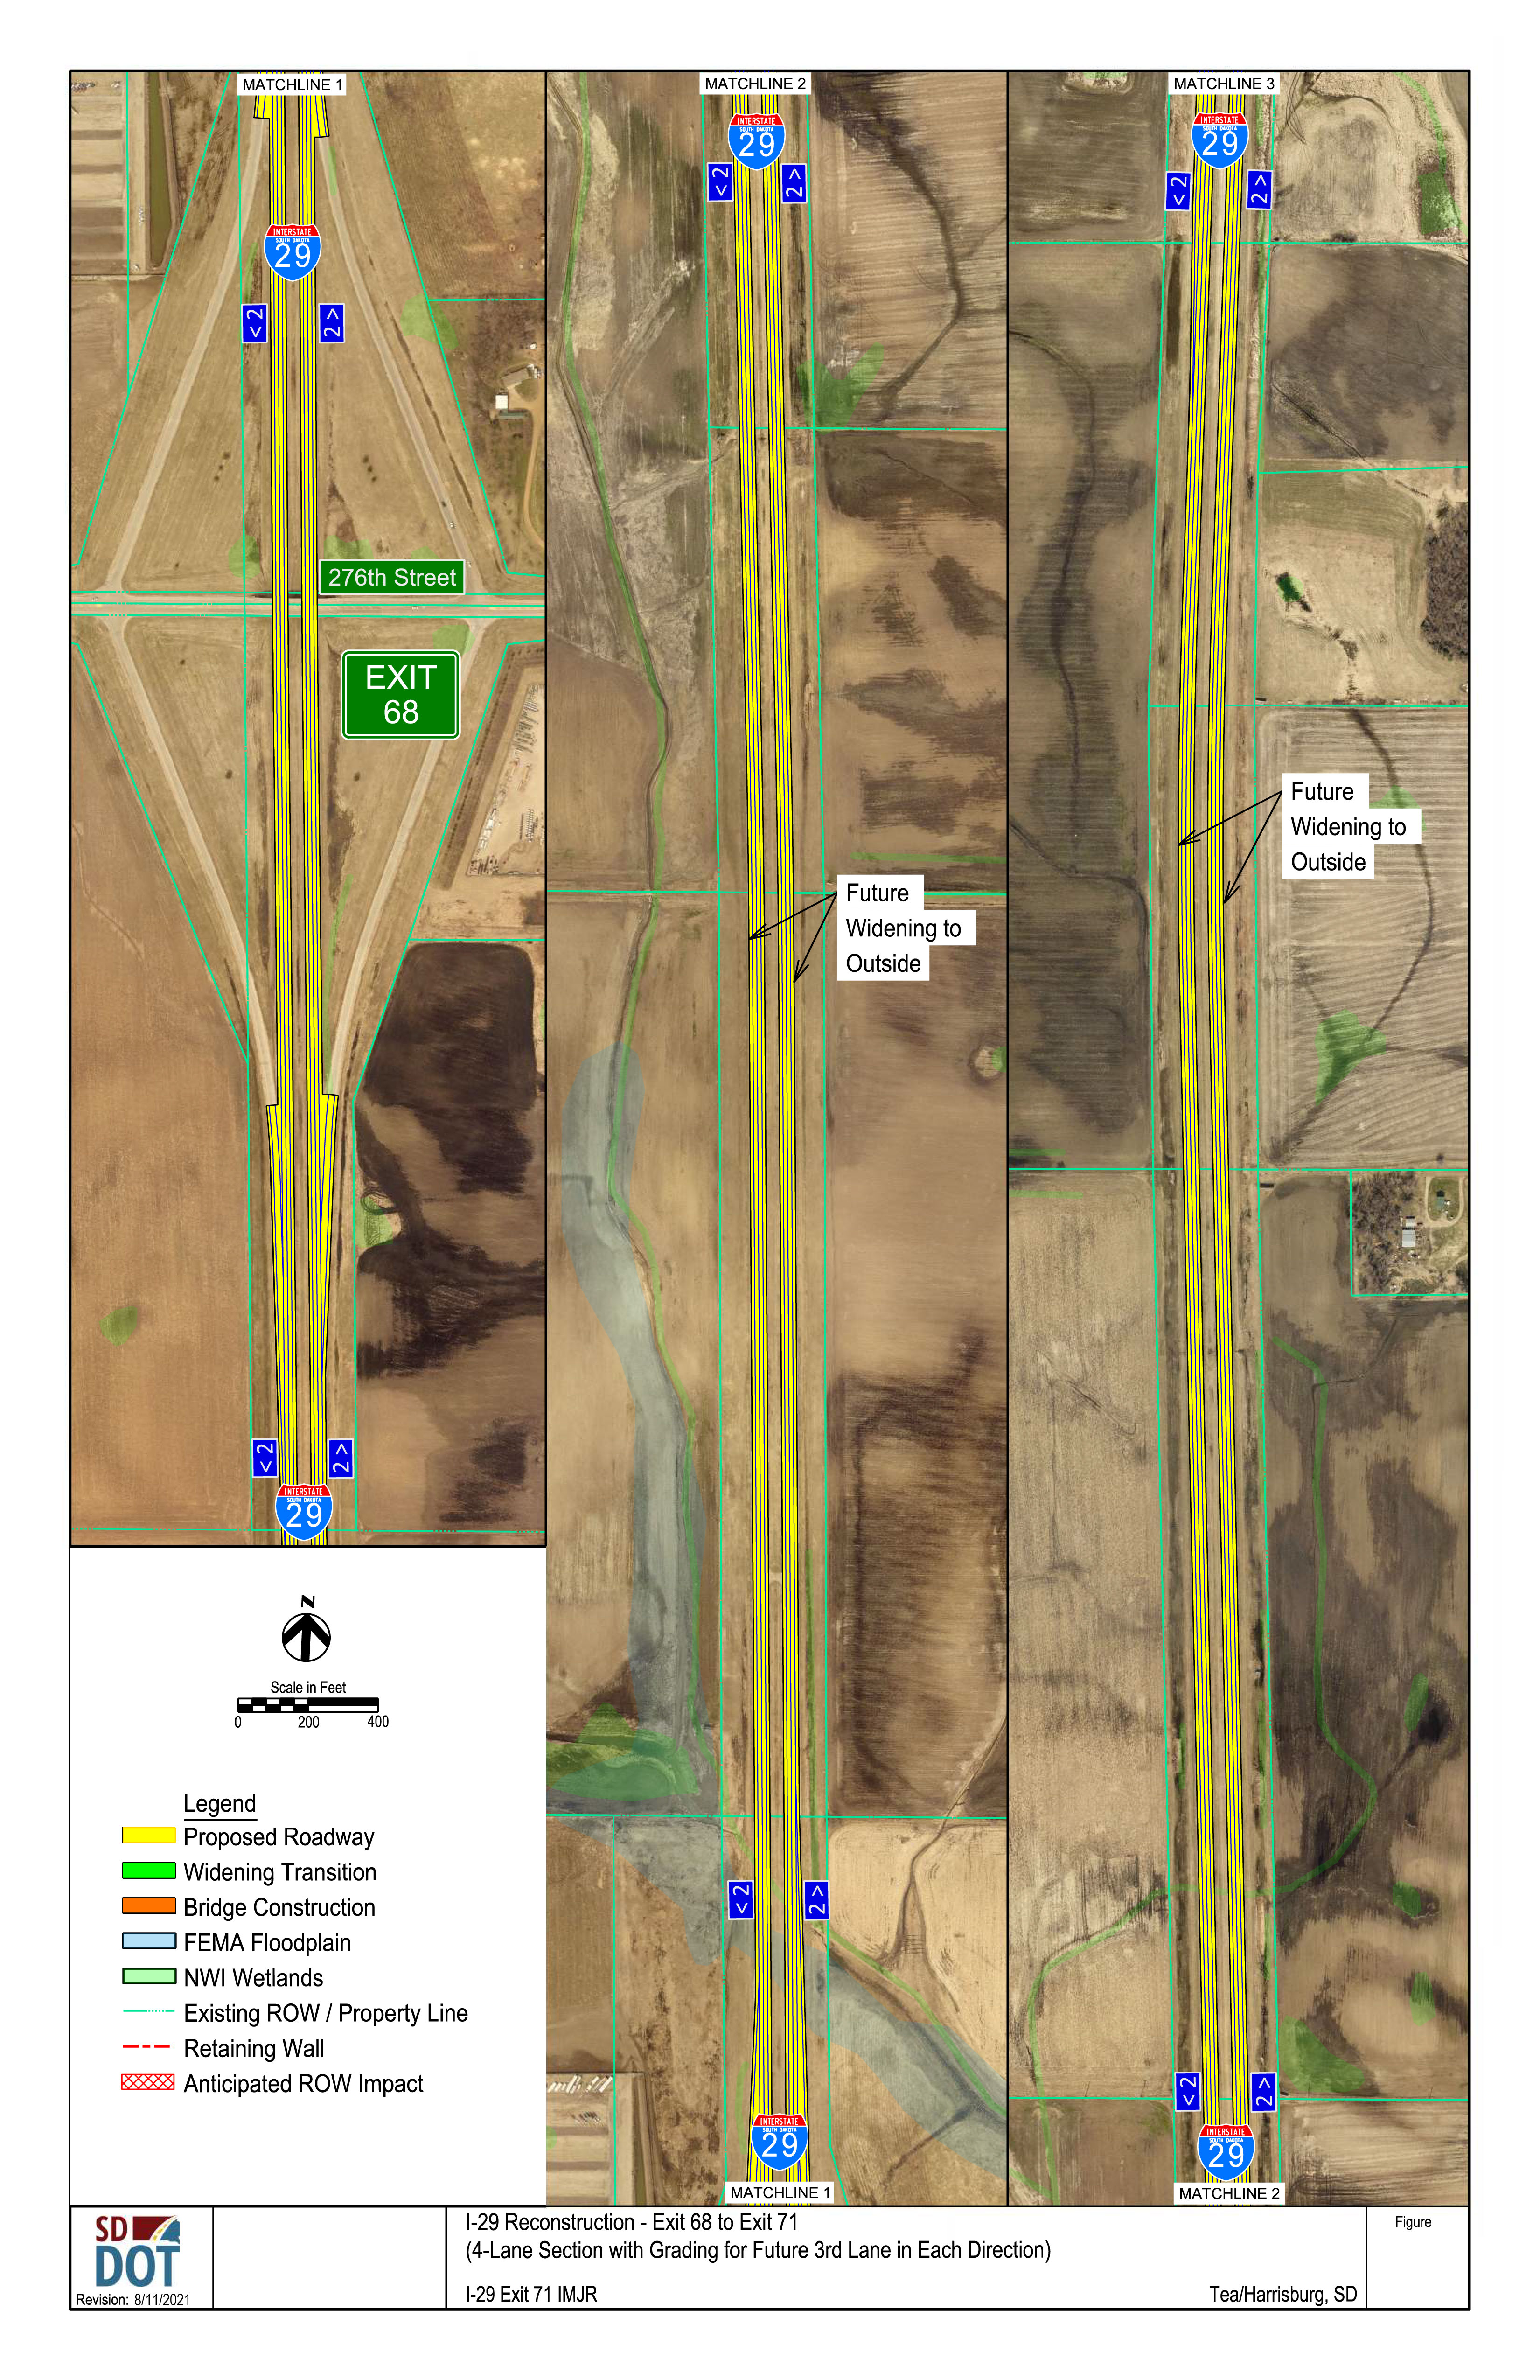 This image shows the conceptual layout of a 4-lane section with grading for a future third lane in each direction from Exits 68 to 71. Details on the diagram include the proposed roadway, the widening transition, bridge construction, FEMA floodplain, NWI Wetlands, existing right of way and property lines, retaining walls and anticipated right of way impacts. 